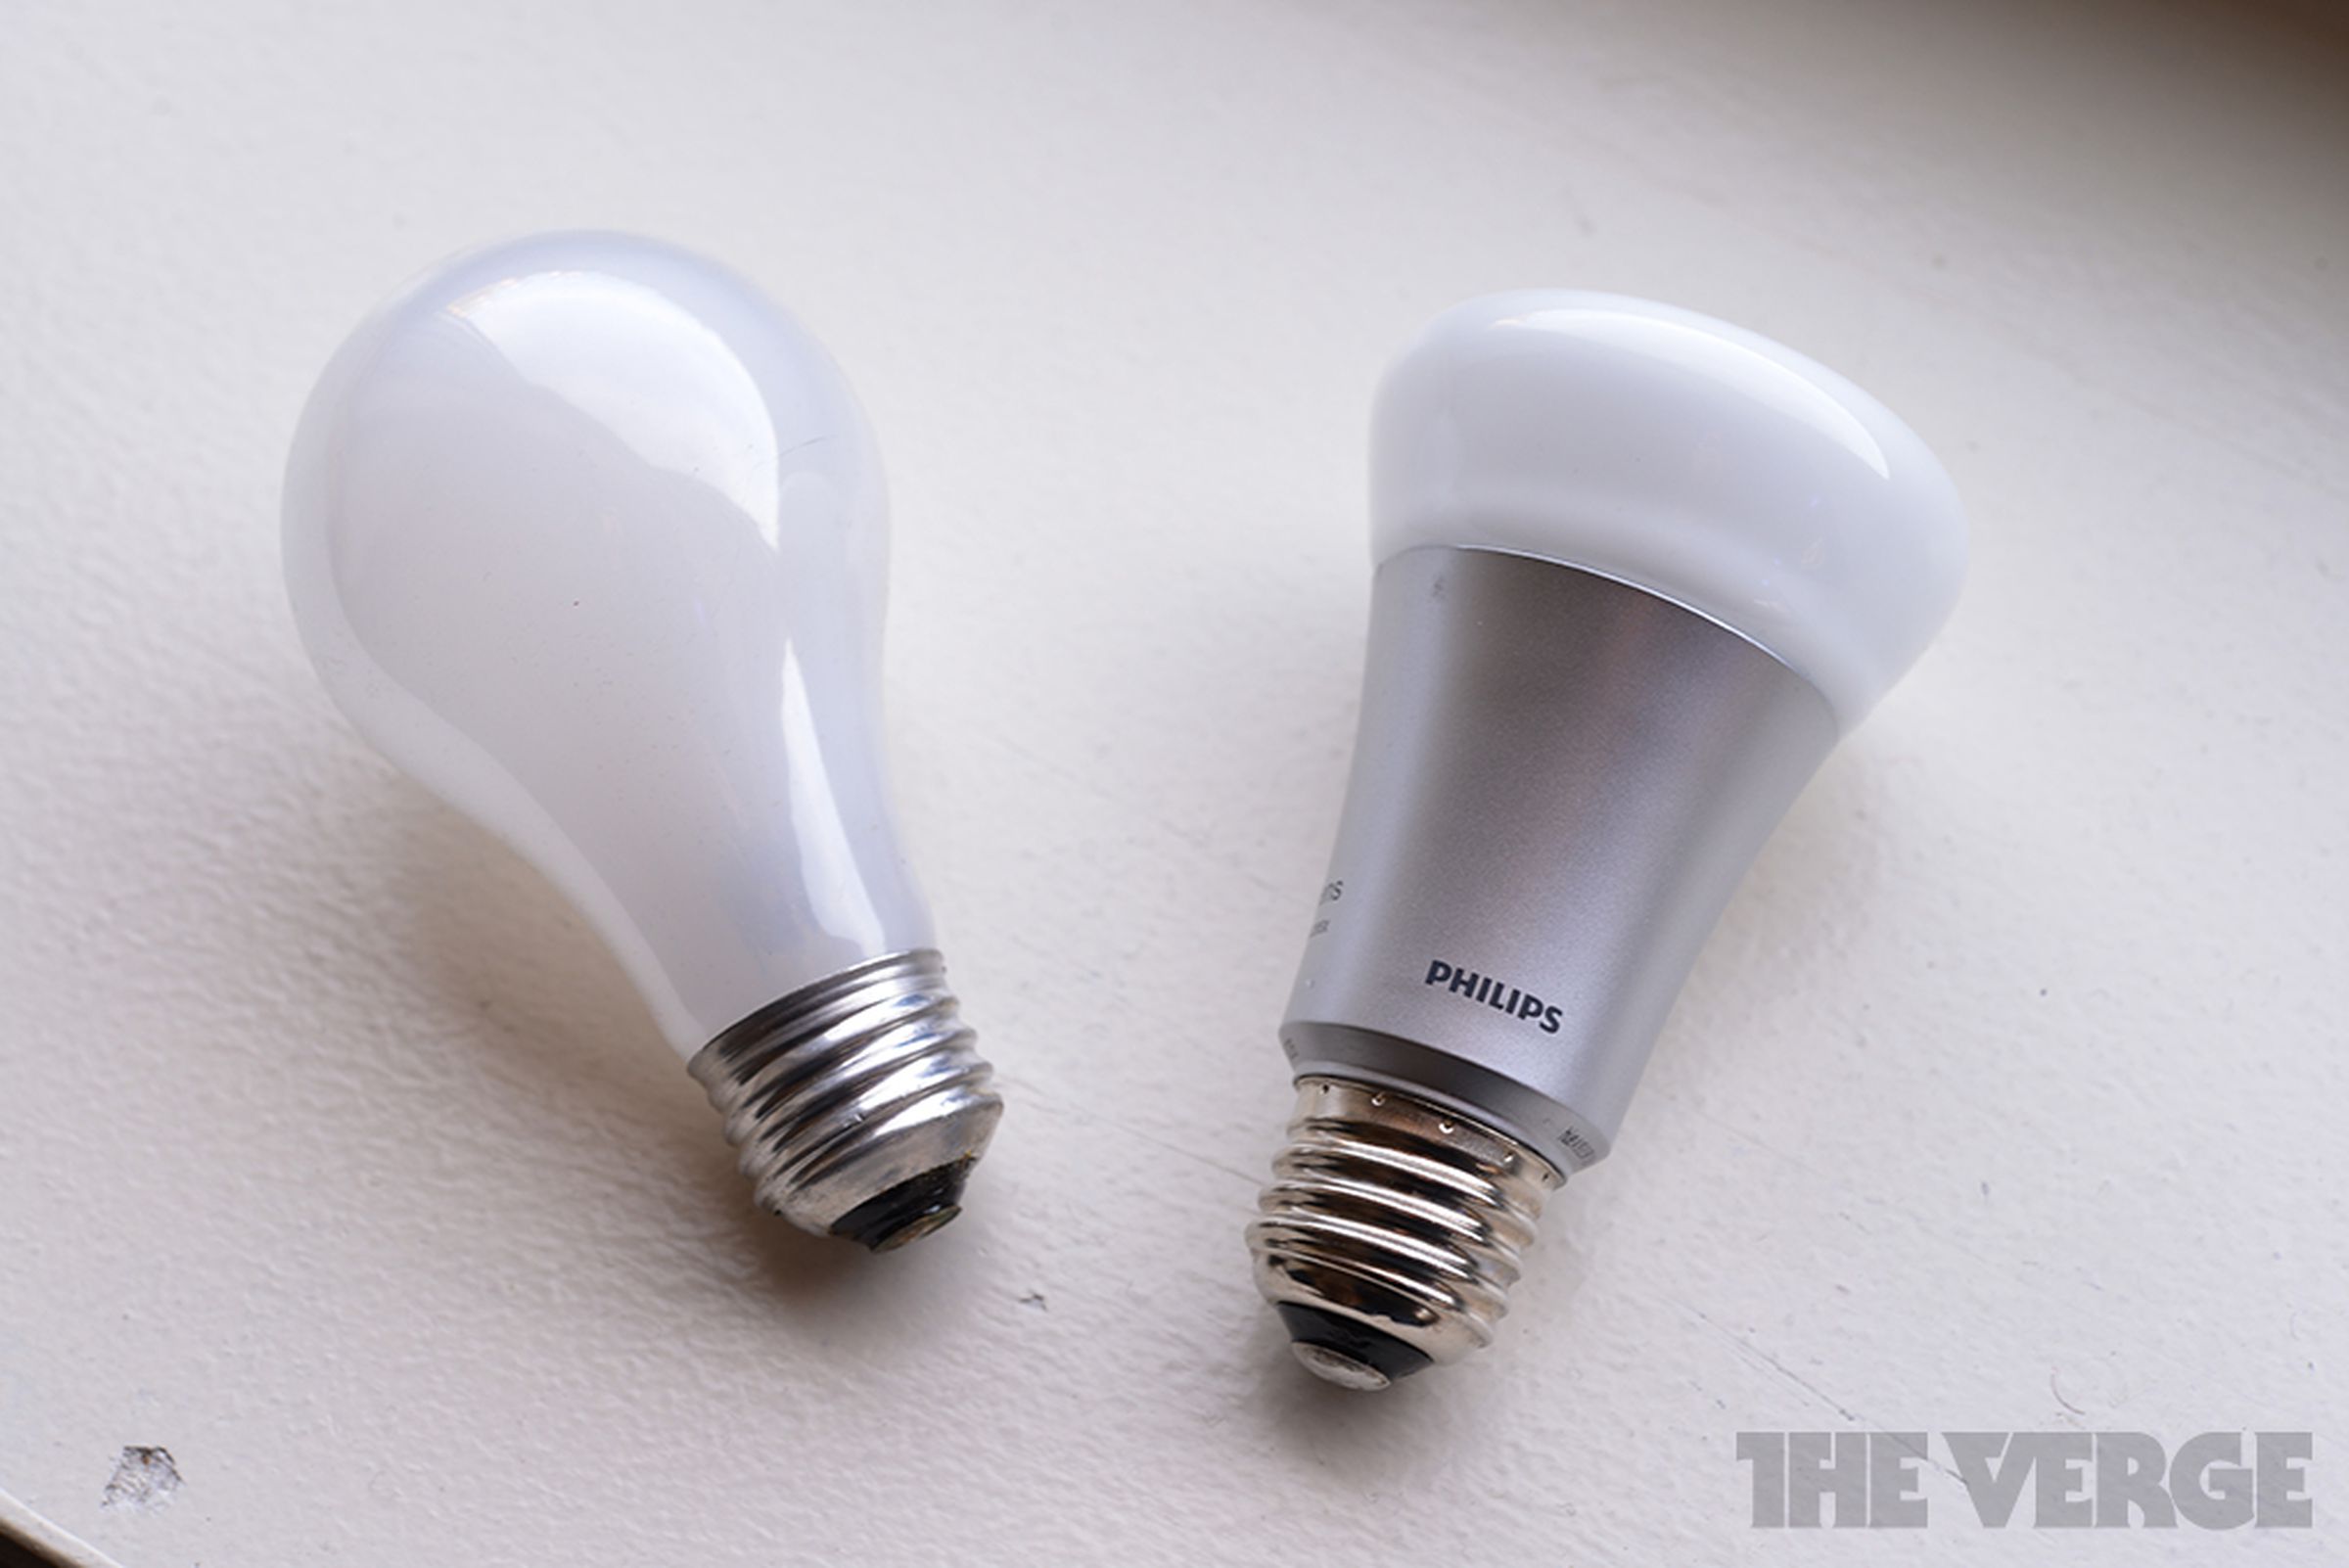 Philips Hue smart LED lightbulbs (hands-on pictures)